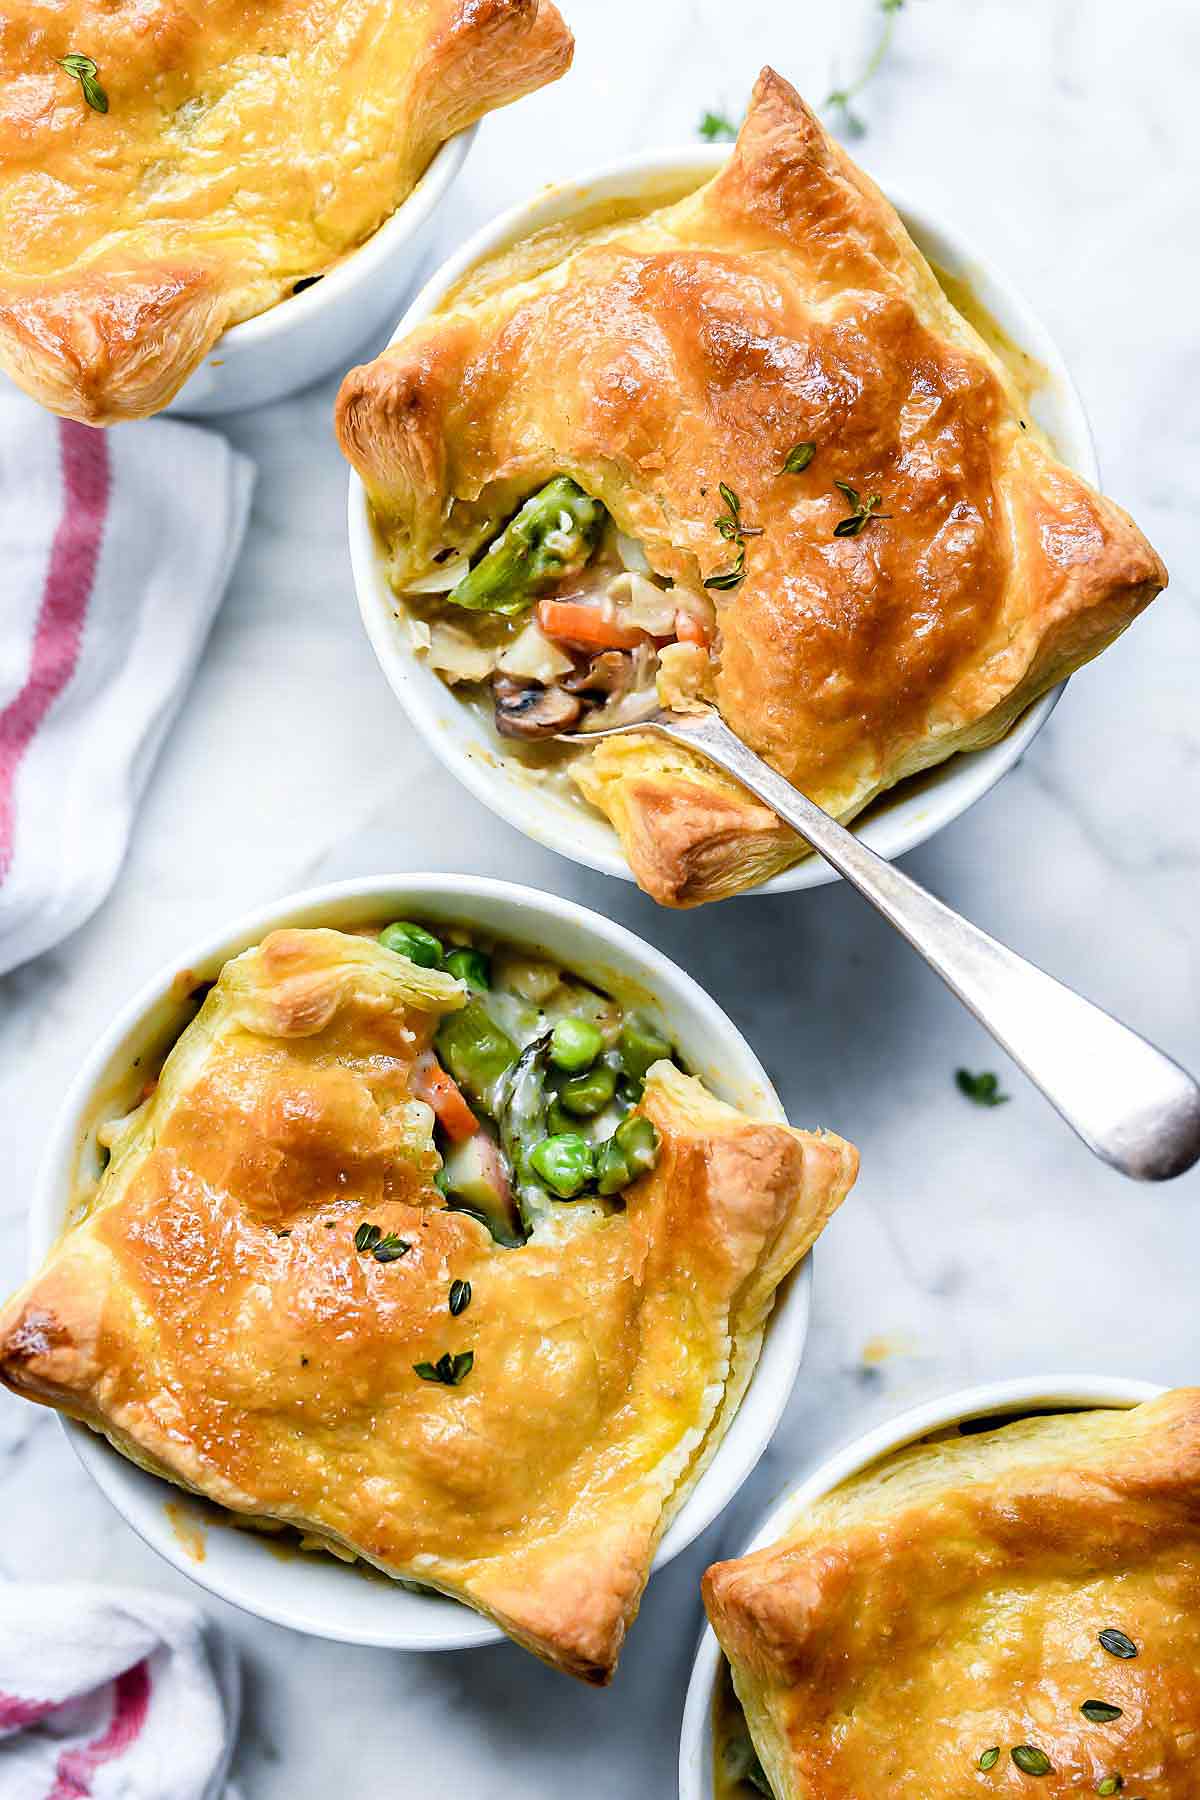 Mini Chicken Pot Pies with Puff Pastry ~ Barley & Sage